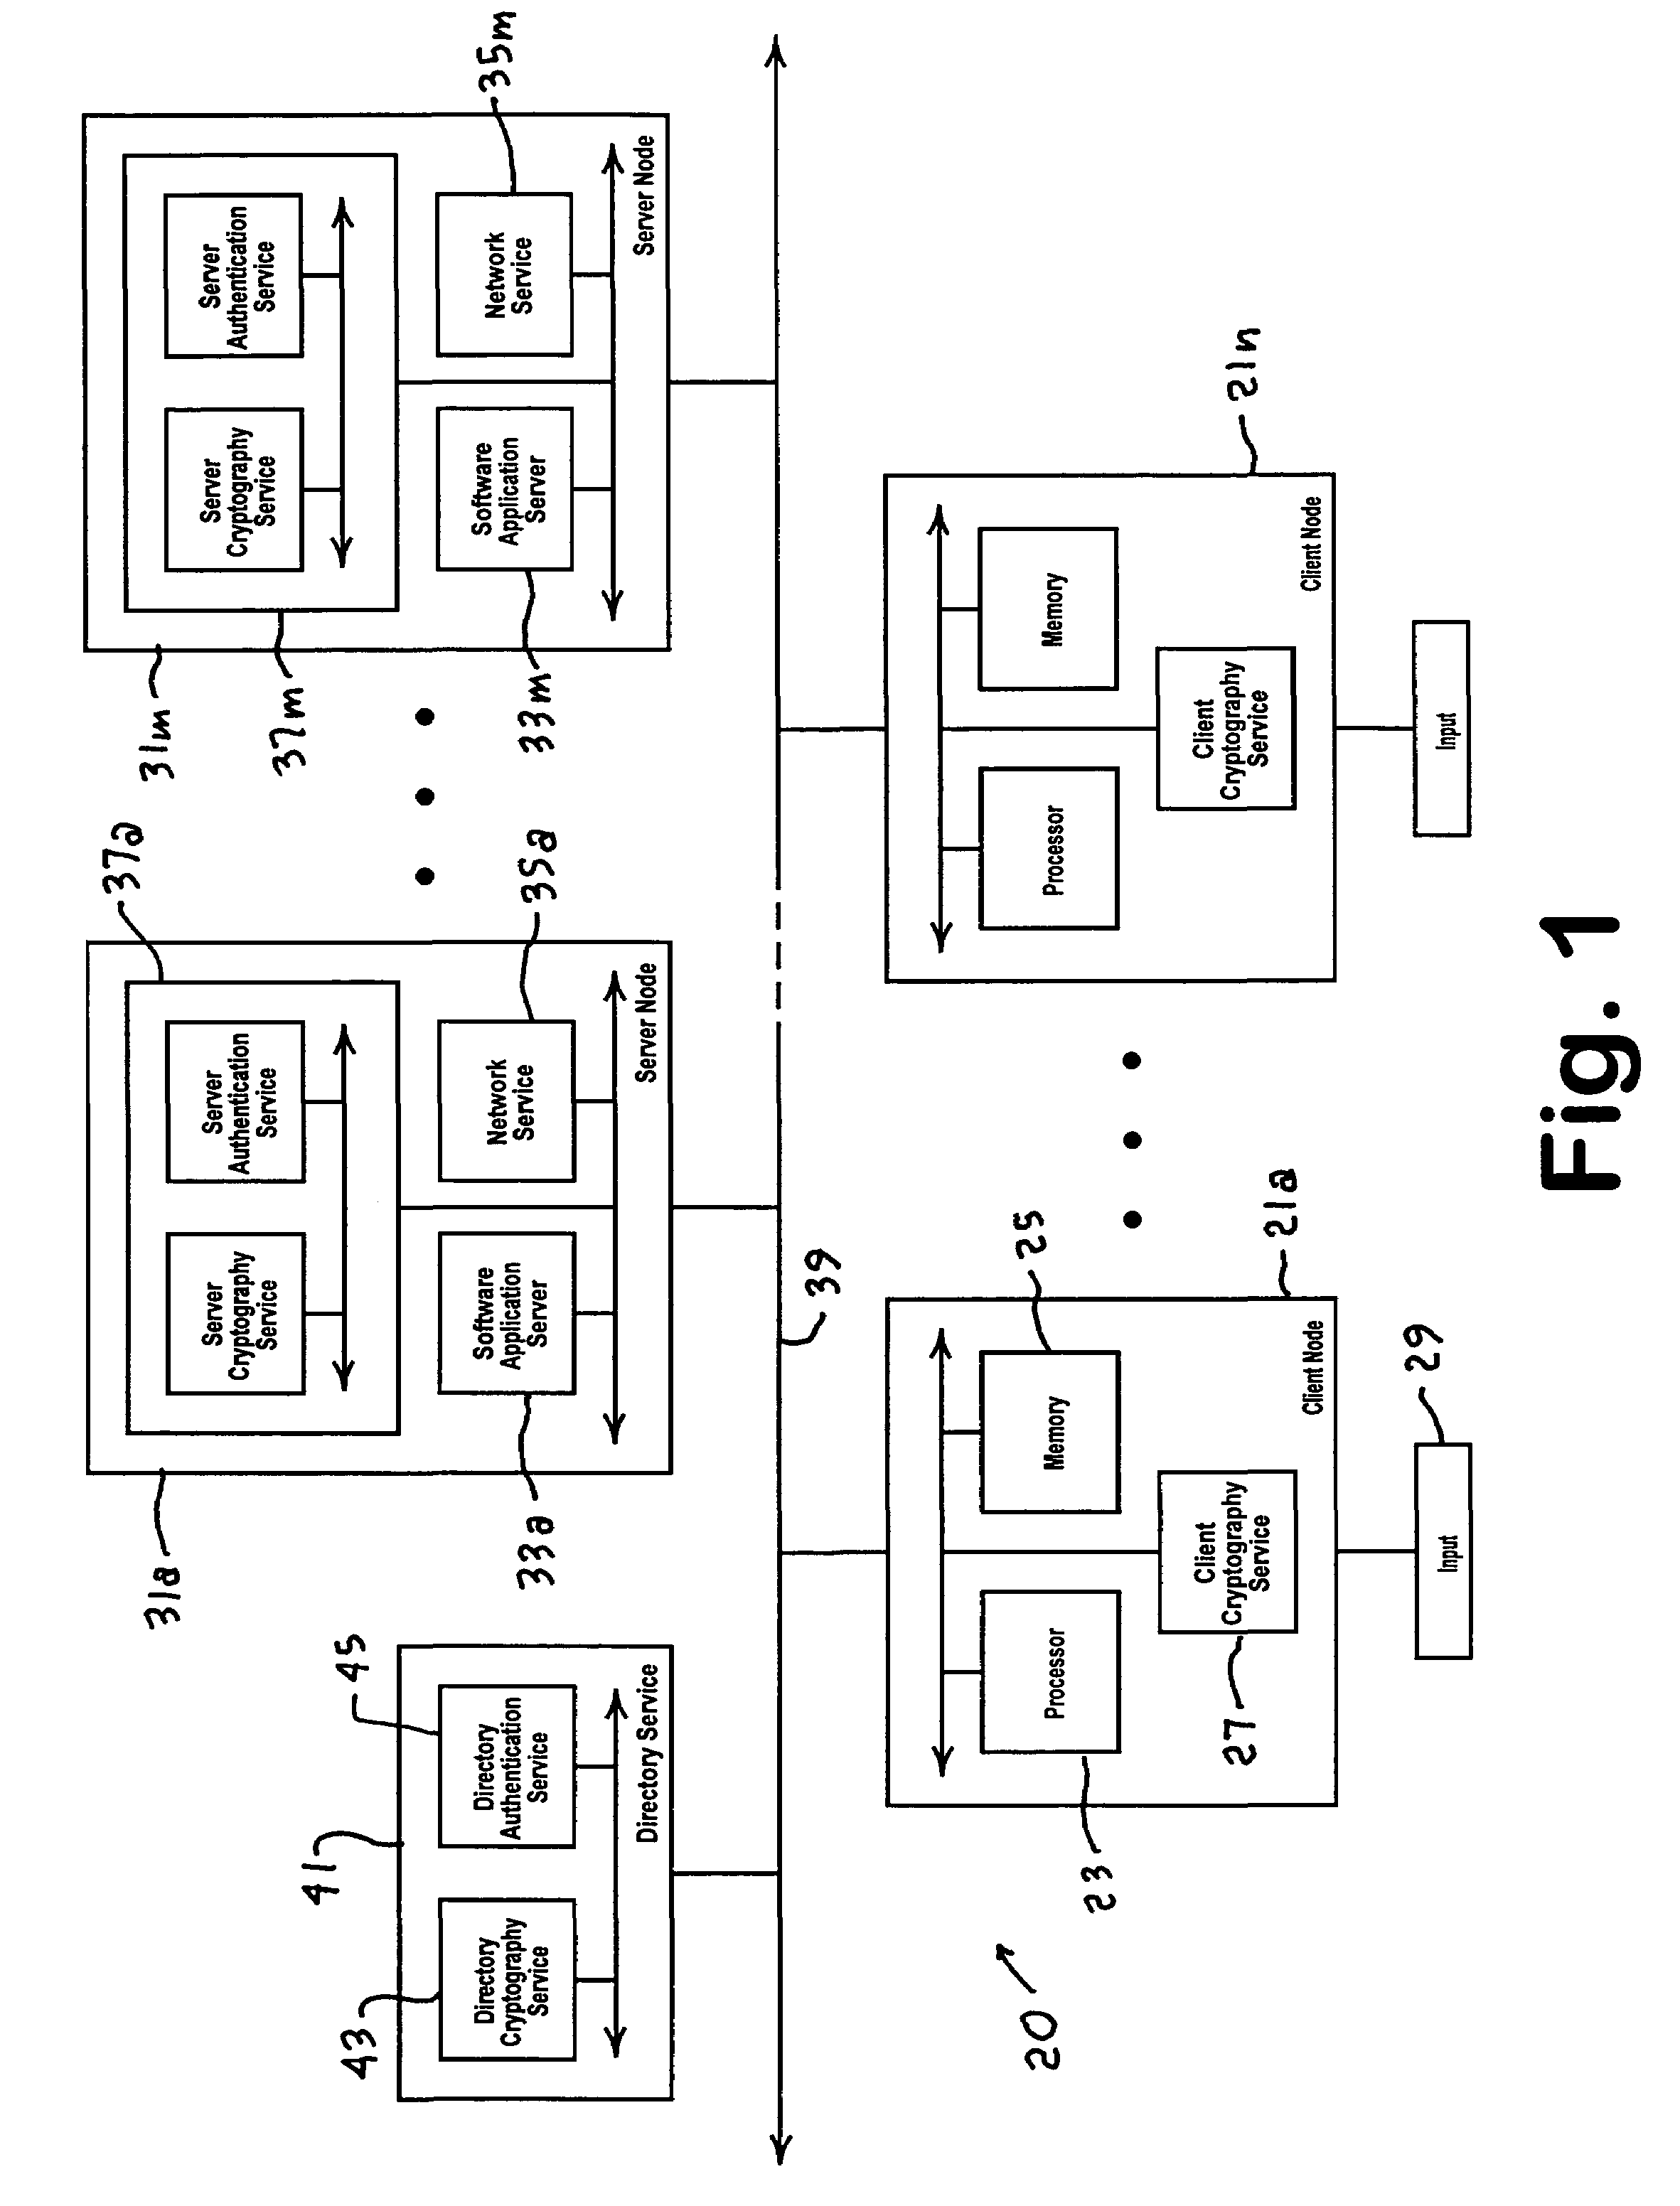 Apparatus and method for automatically authenticating a network client